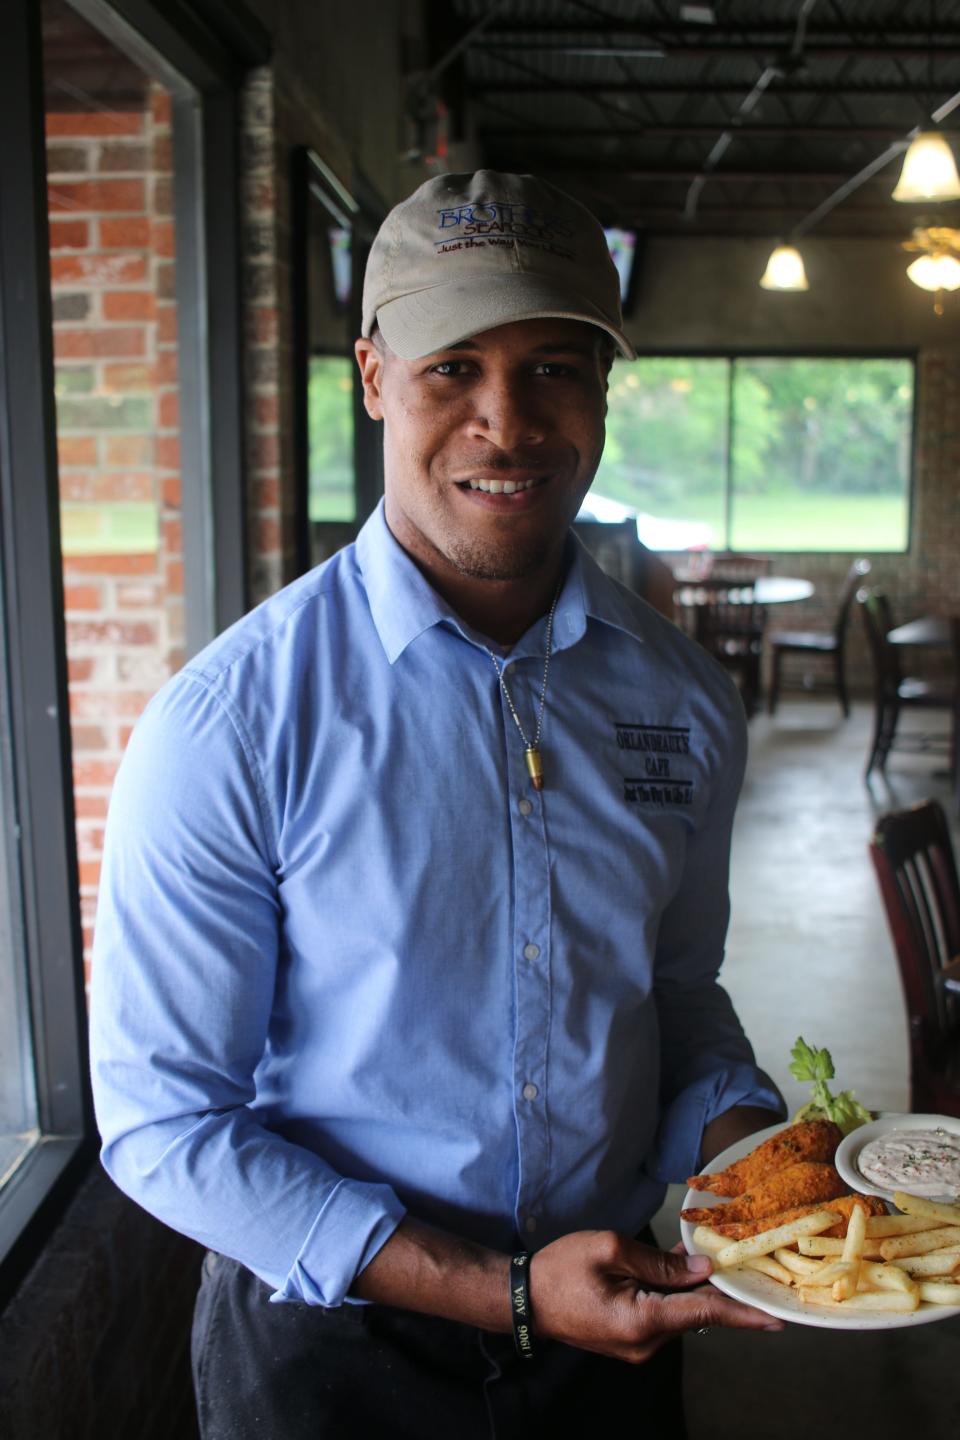 Damien Chapman, owner of Orlandeaux's Cafe, located 5301 S Lakeshore Dr. in Shreveport.